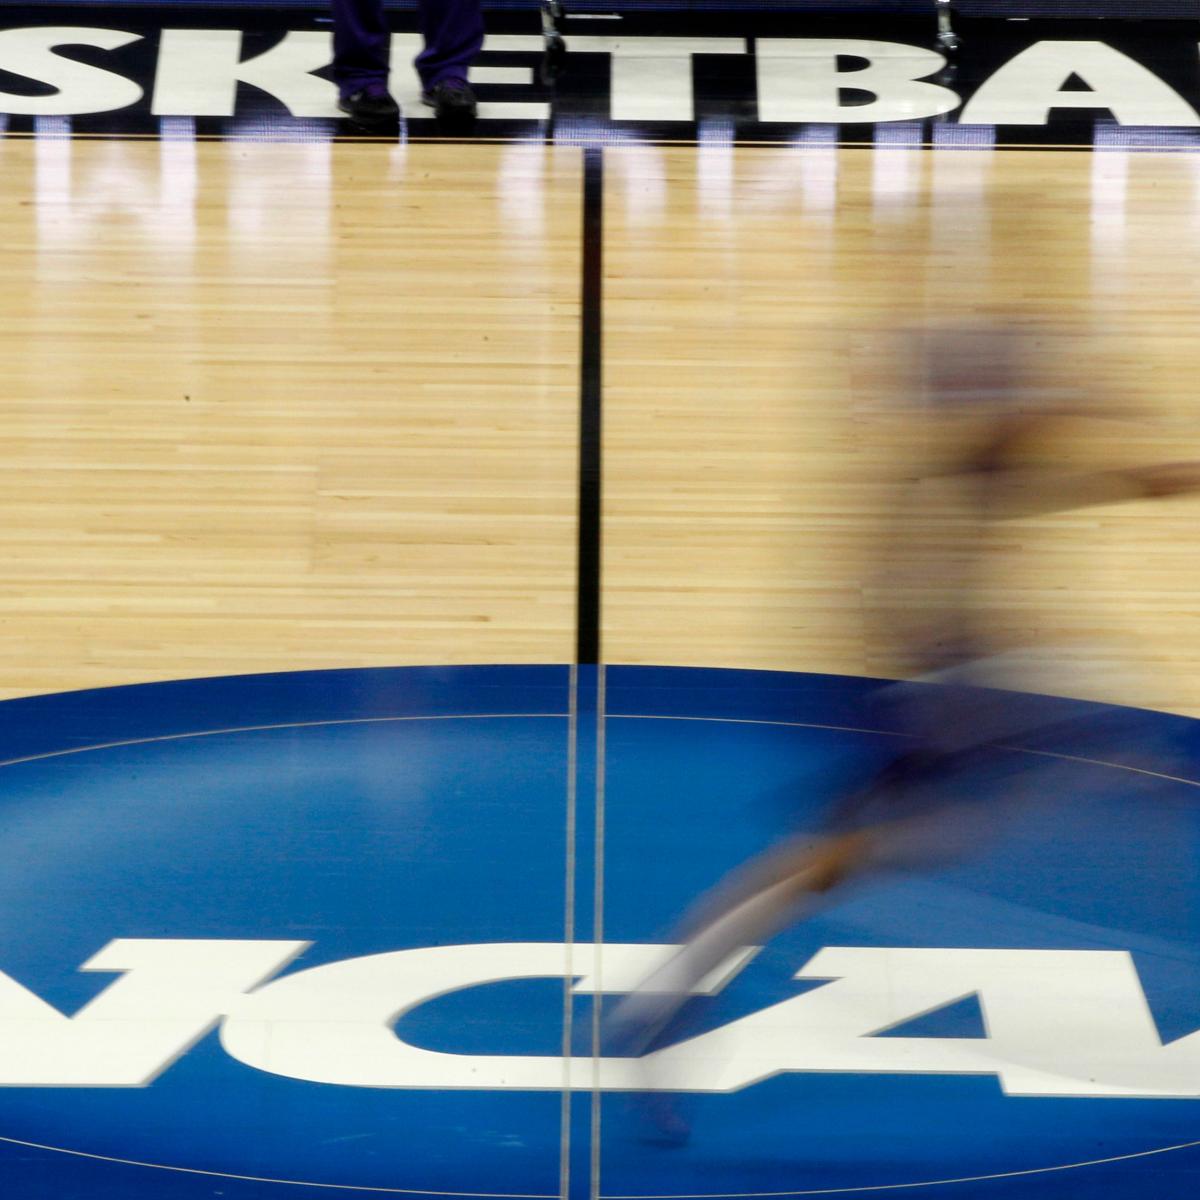 NCAA Extends Recruiting Dead Period Through July 31 Amid COVID19